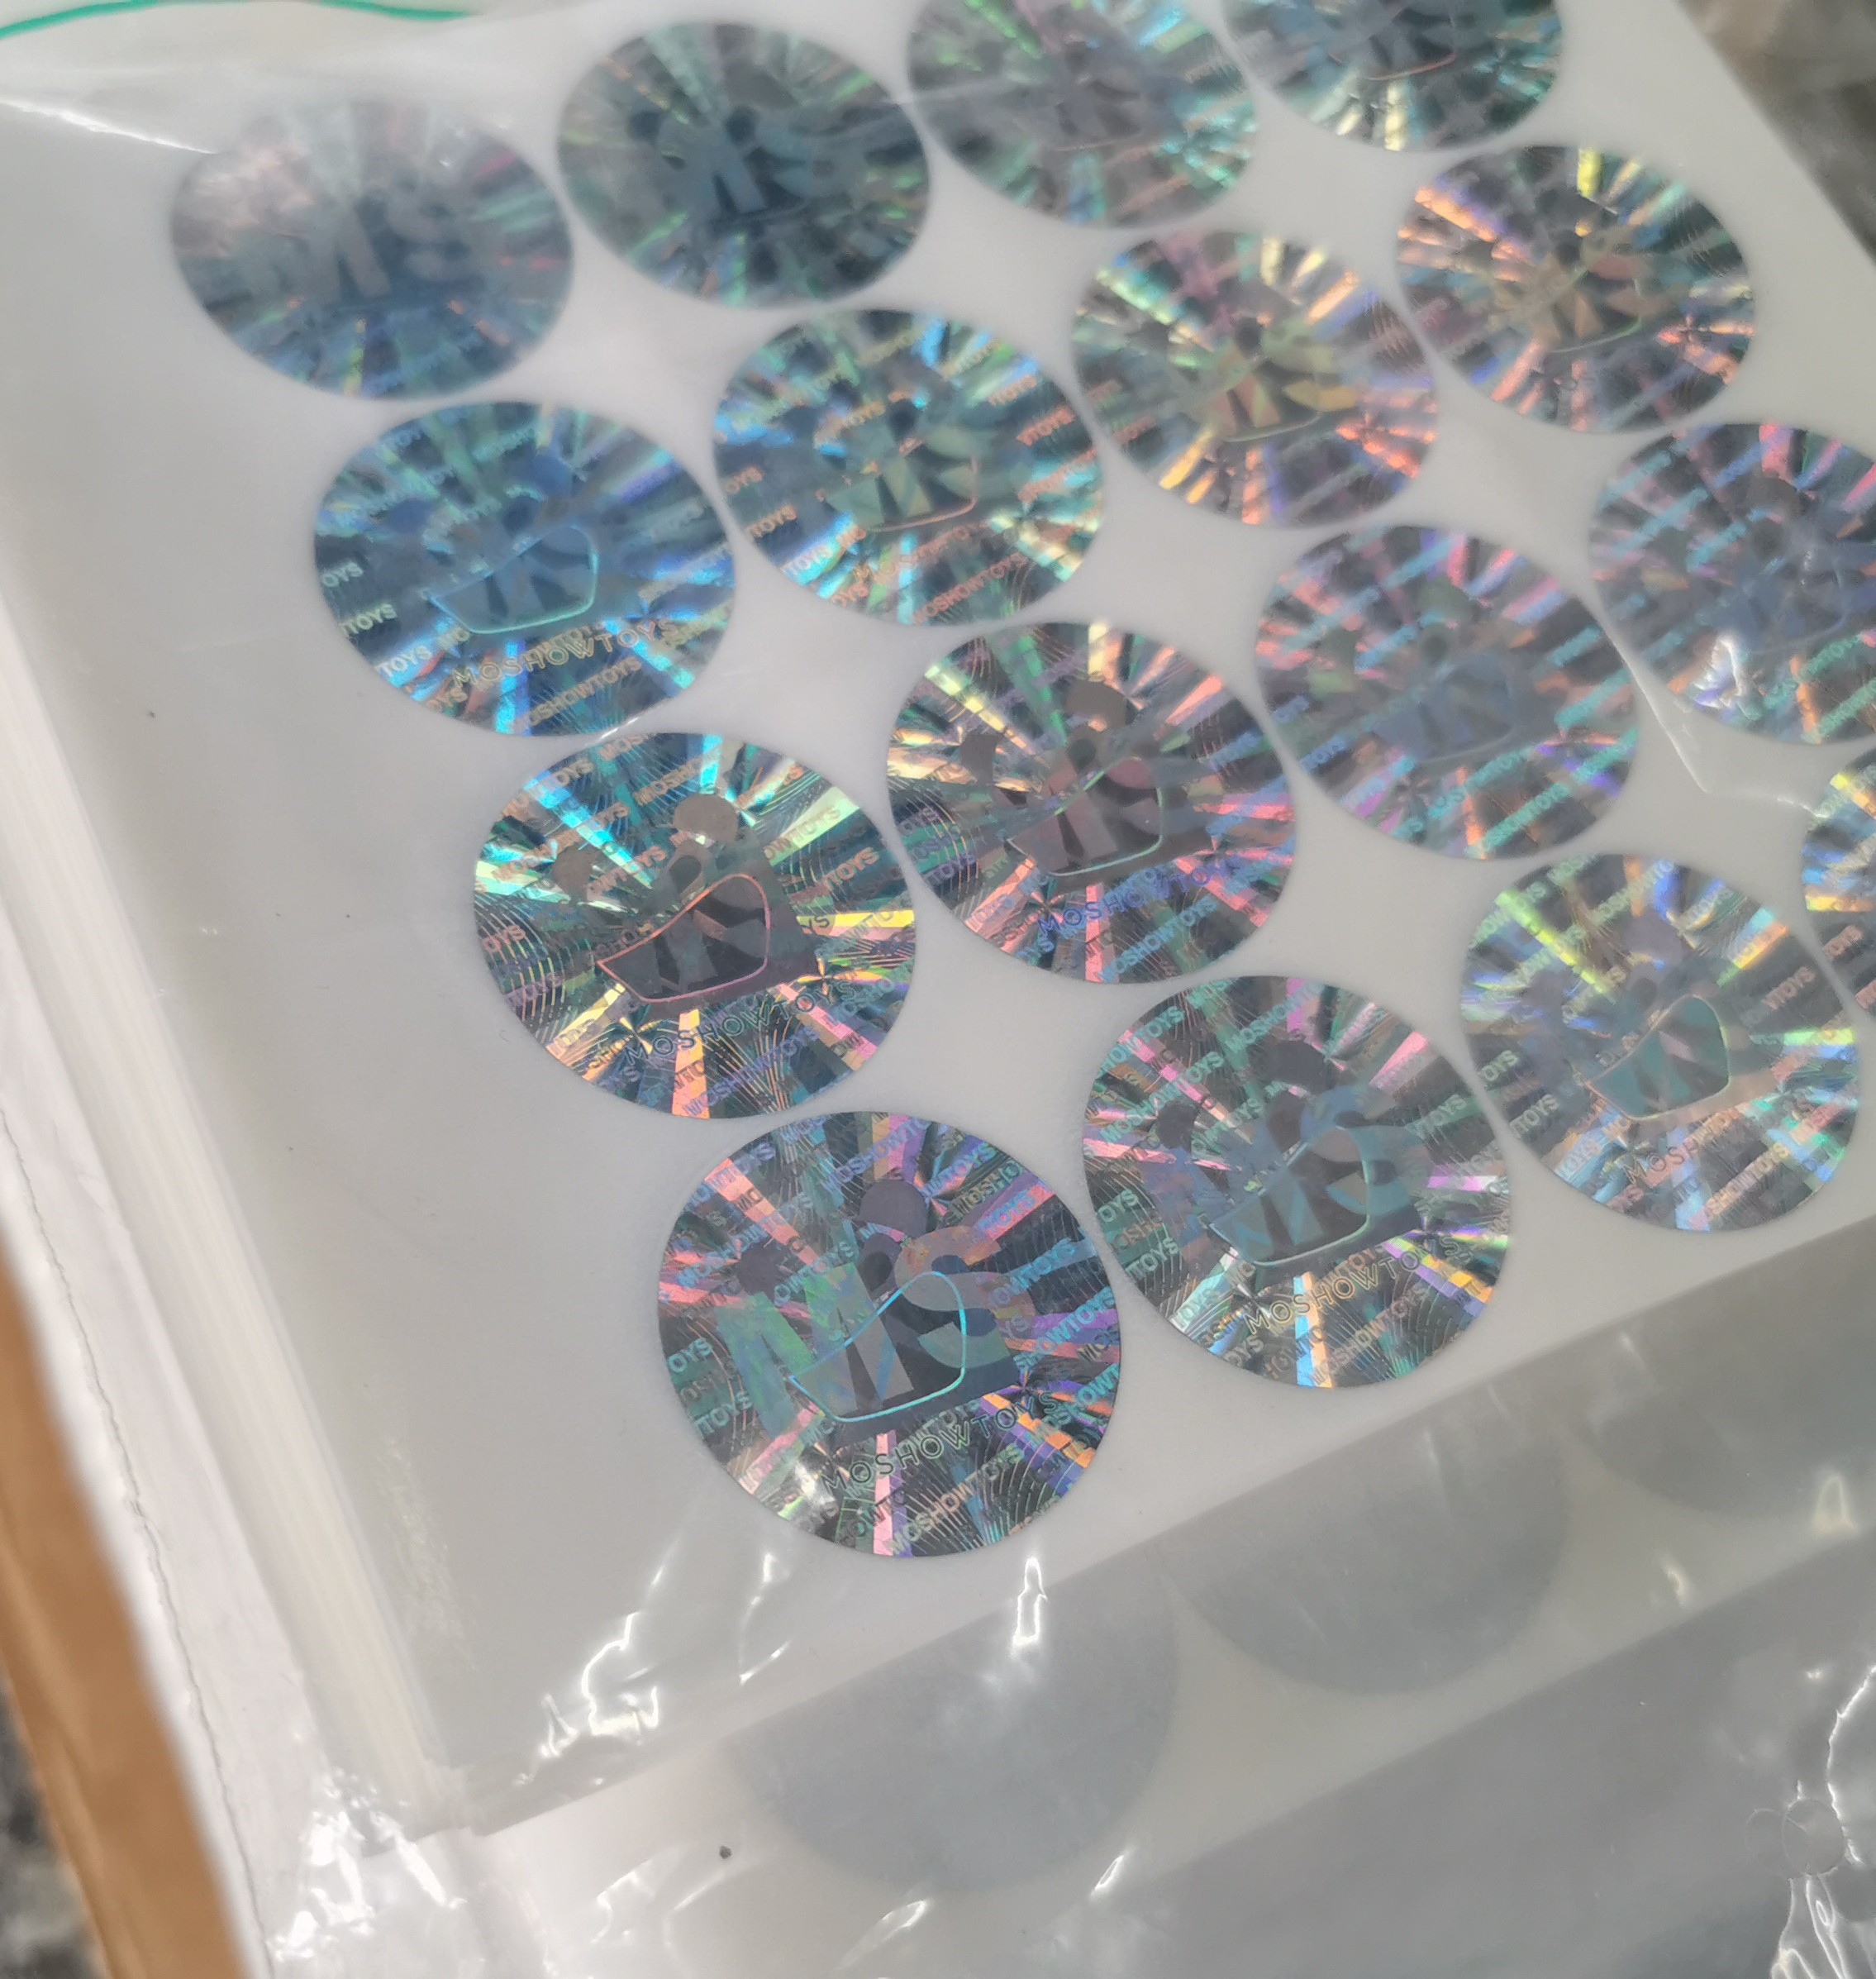 Dual channel holographic sticker